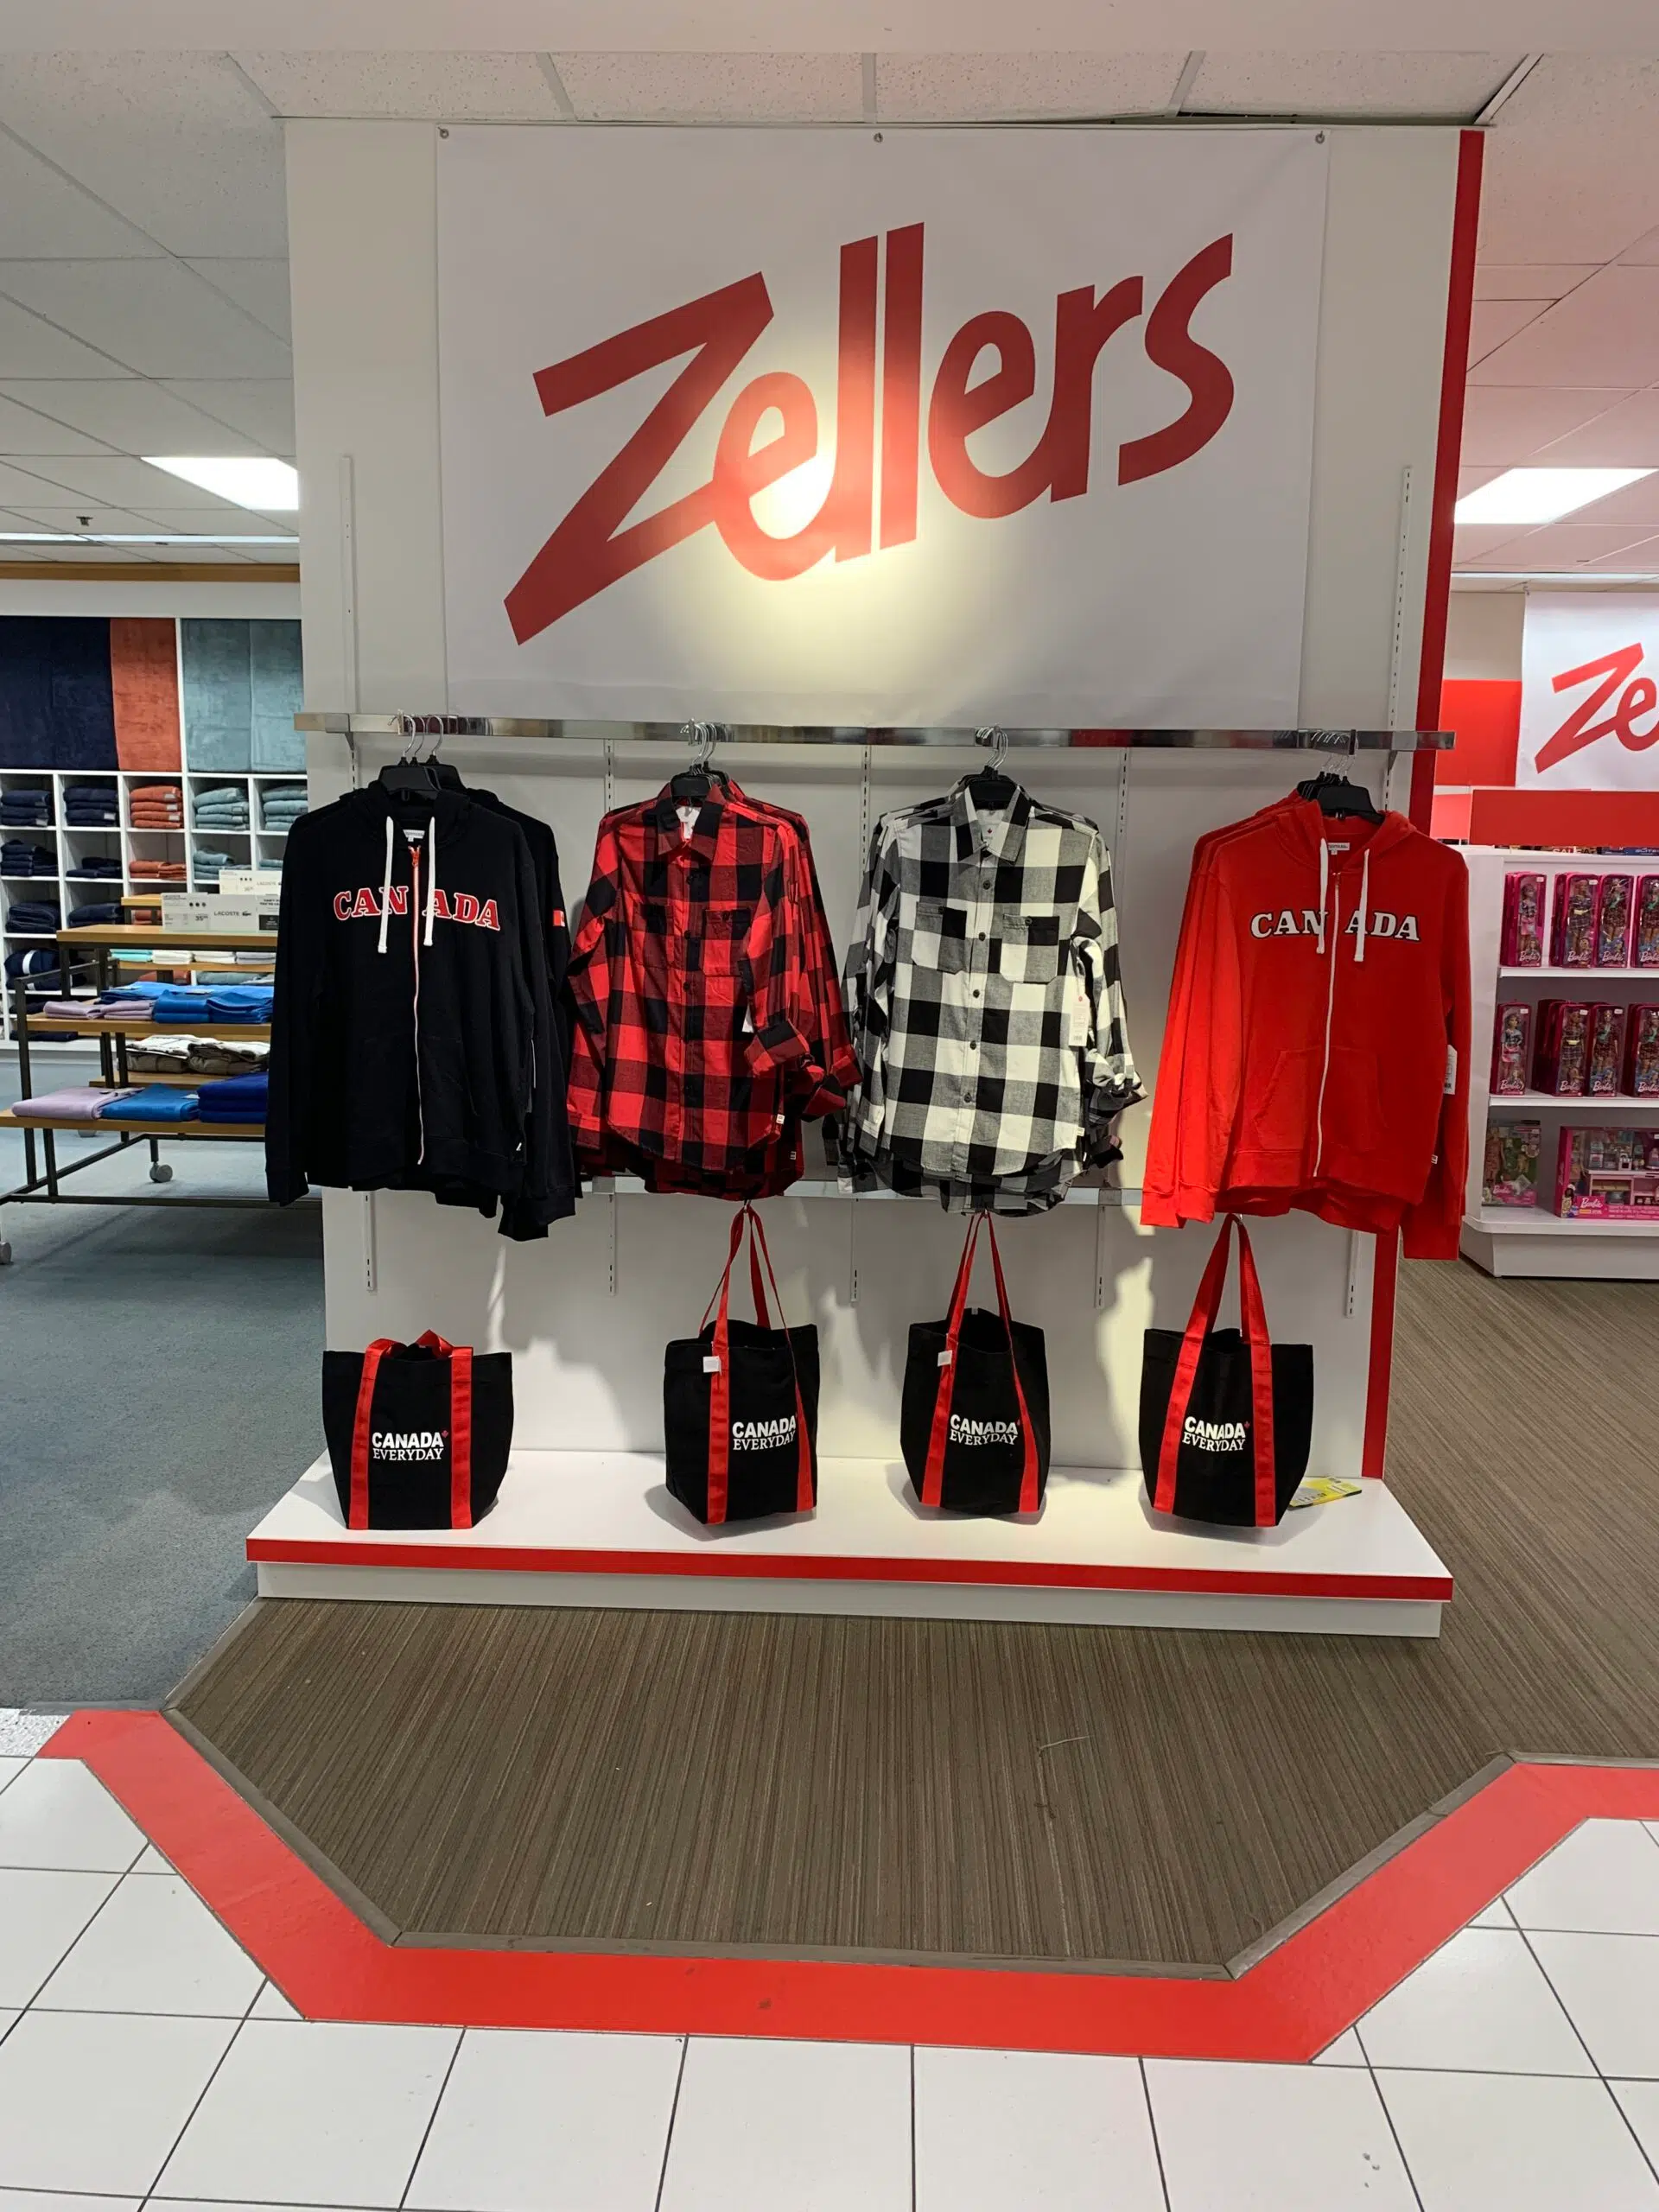 The Zellers Brand is to be revived . What other store chain or brand  would you like to see return ?